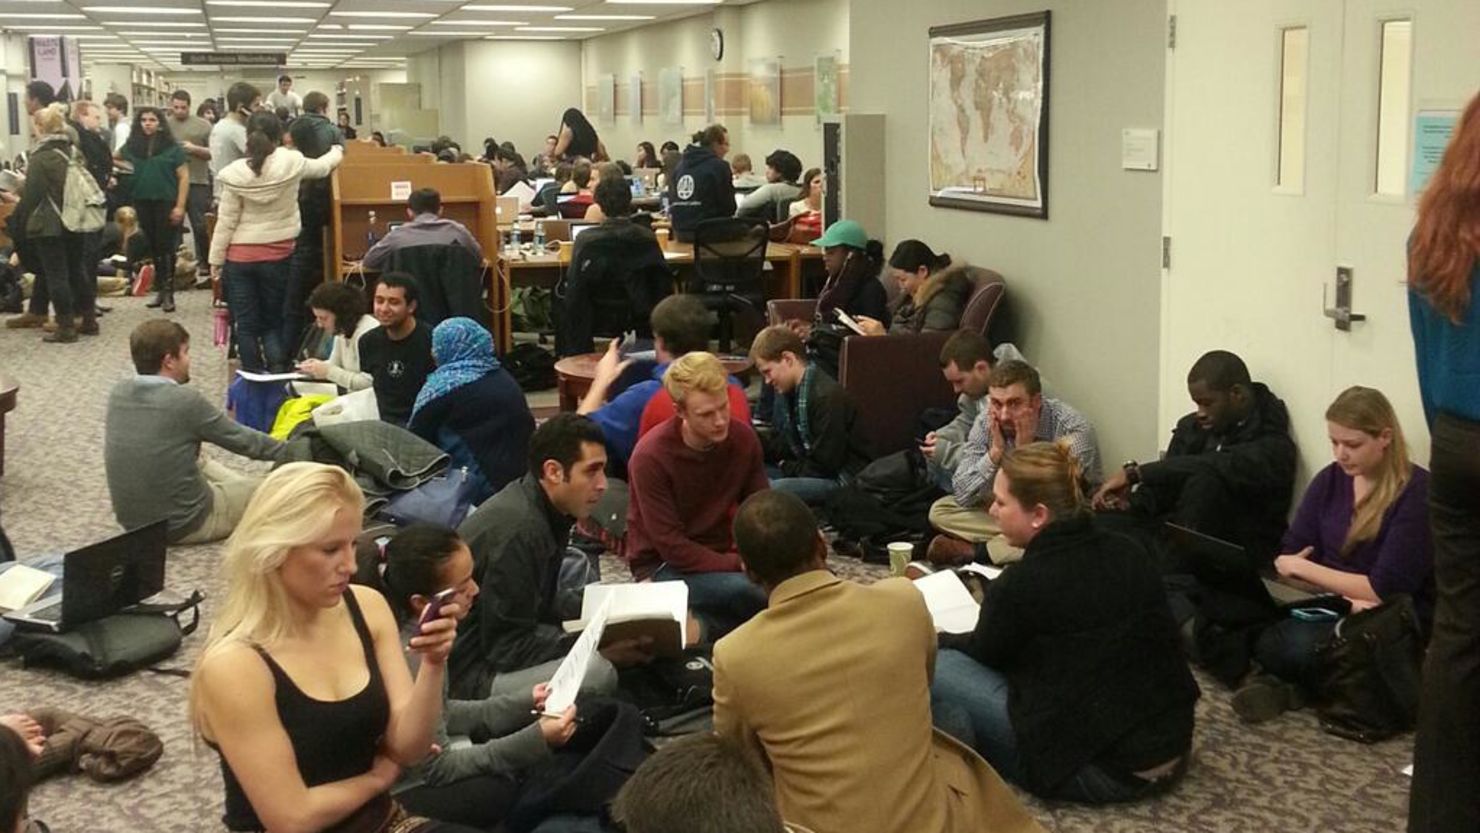 Many students took shelter in a university library during the two-hour lockdown spurred by reports of a gunman on campus.